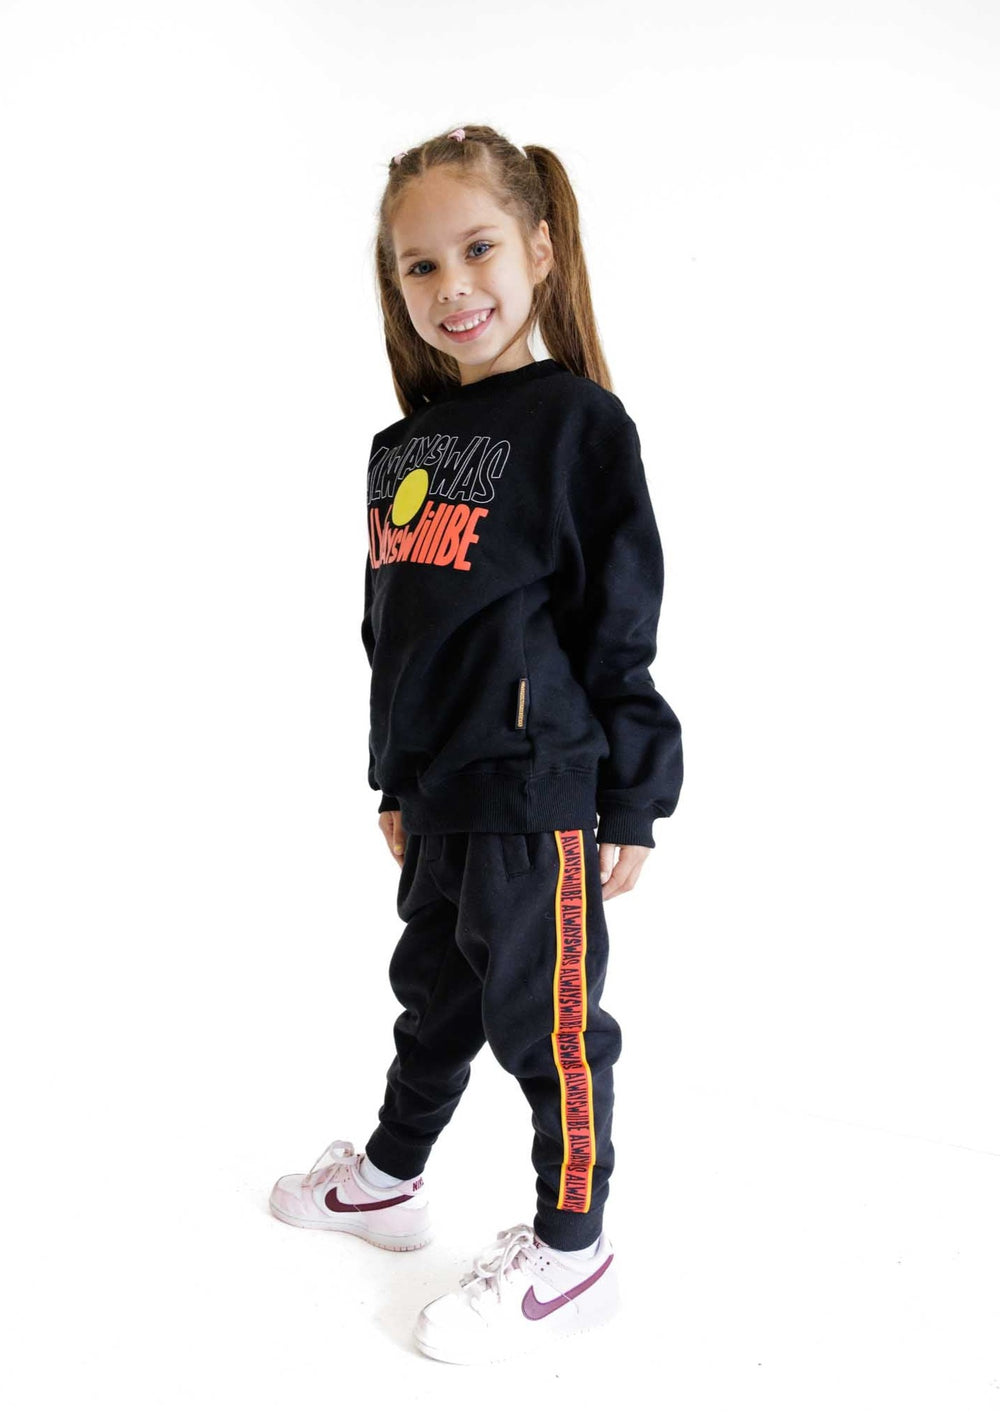 Clothing the Gaps. KIDS 'Always Was, Always Will Be' Track Pants. Black cotton Pants. With black drawstrings. Elastic cuts and waistband. Embroiled Clothing The Gaps logo. Black 'always was always will be' text on a red background with a yellow trim. In a cotton tape strip going down both sides of pants. 